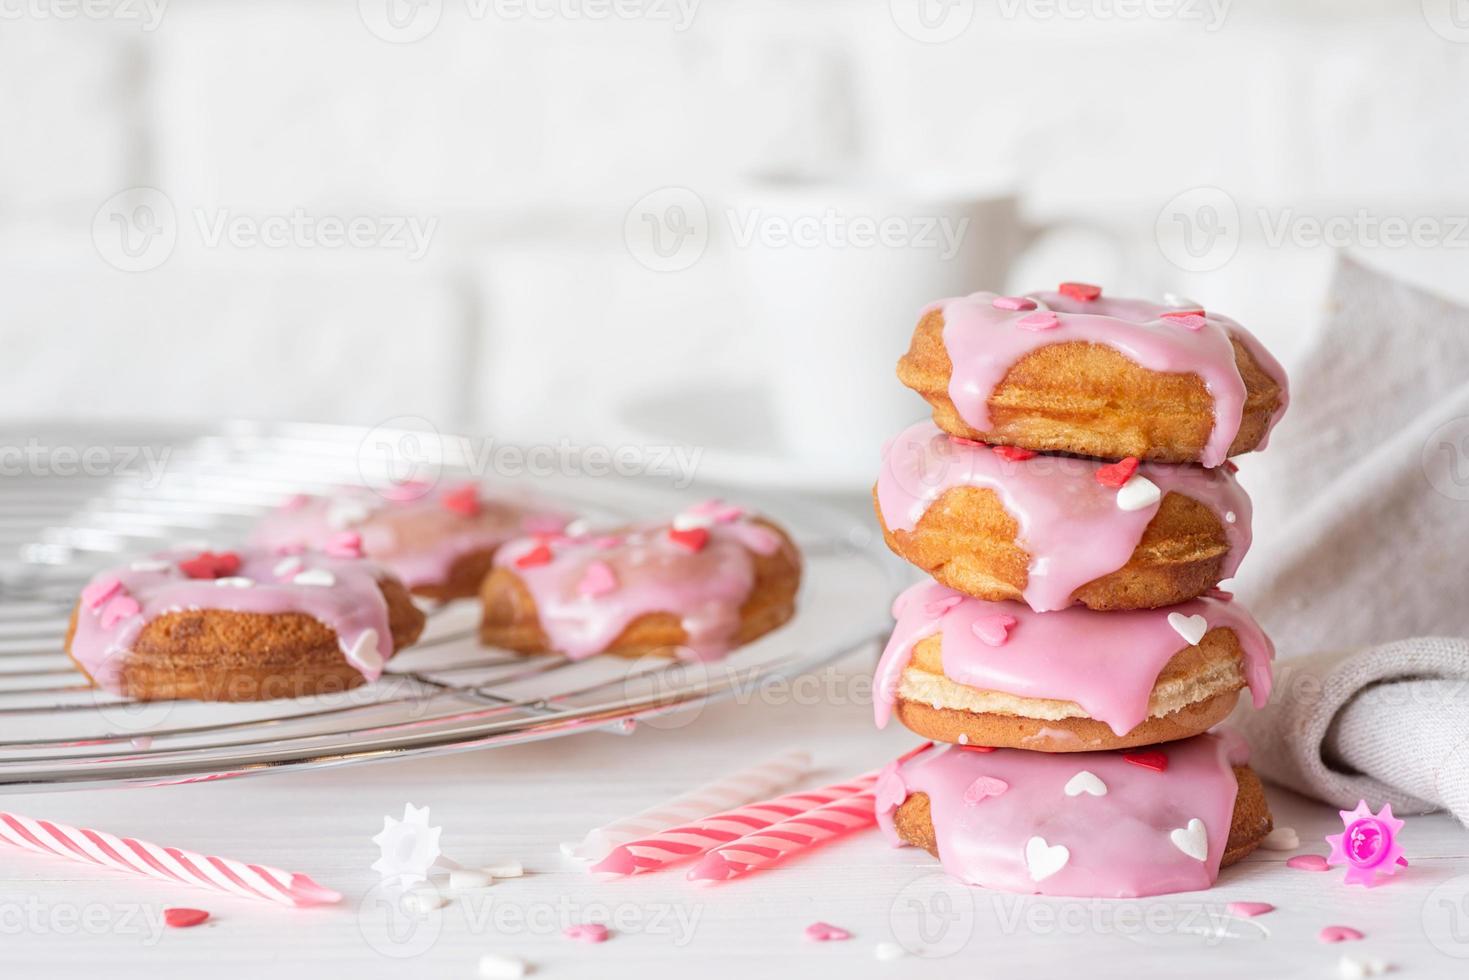 Heart shaped donut with strawberry glaze - Valentines day concept photo